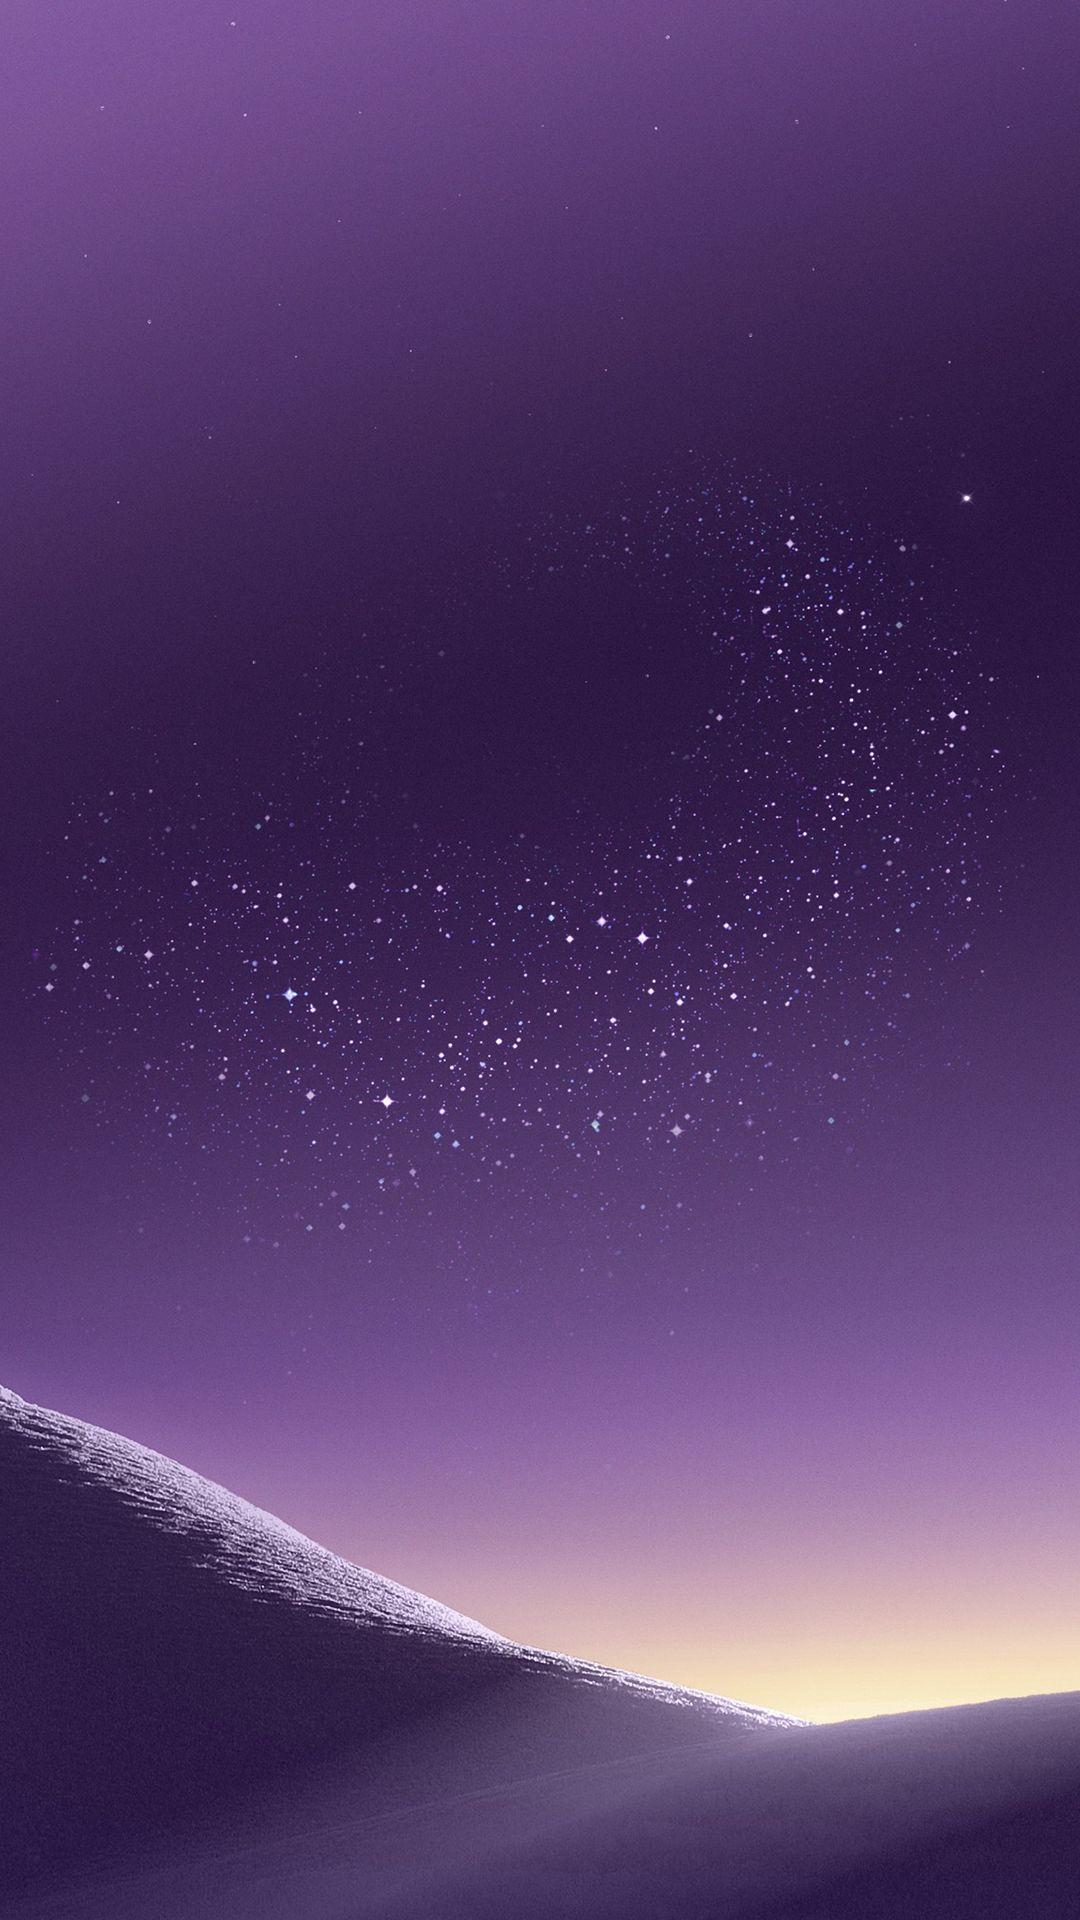 Mountain, wallpaper, galaxy, tranquil, beauty, nature, peaceful